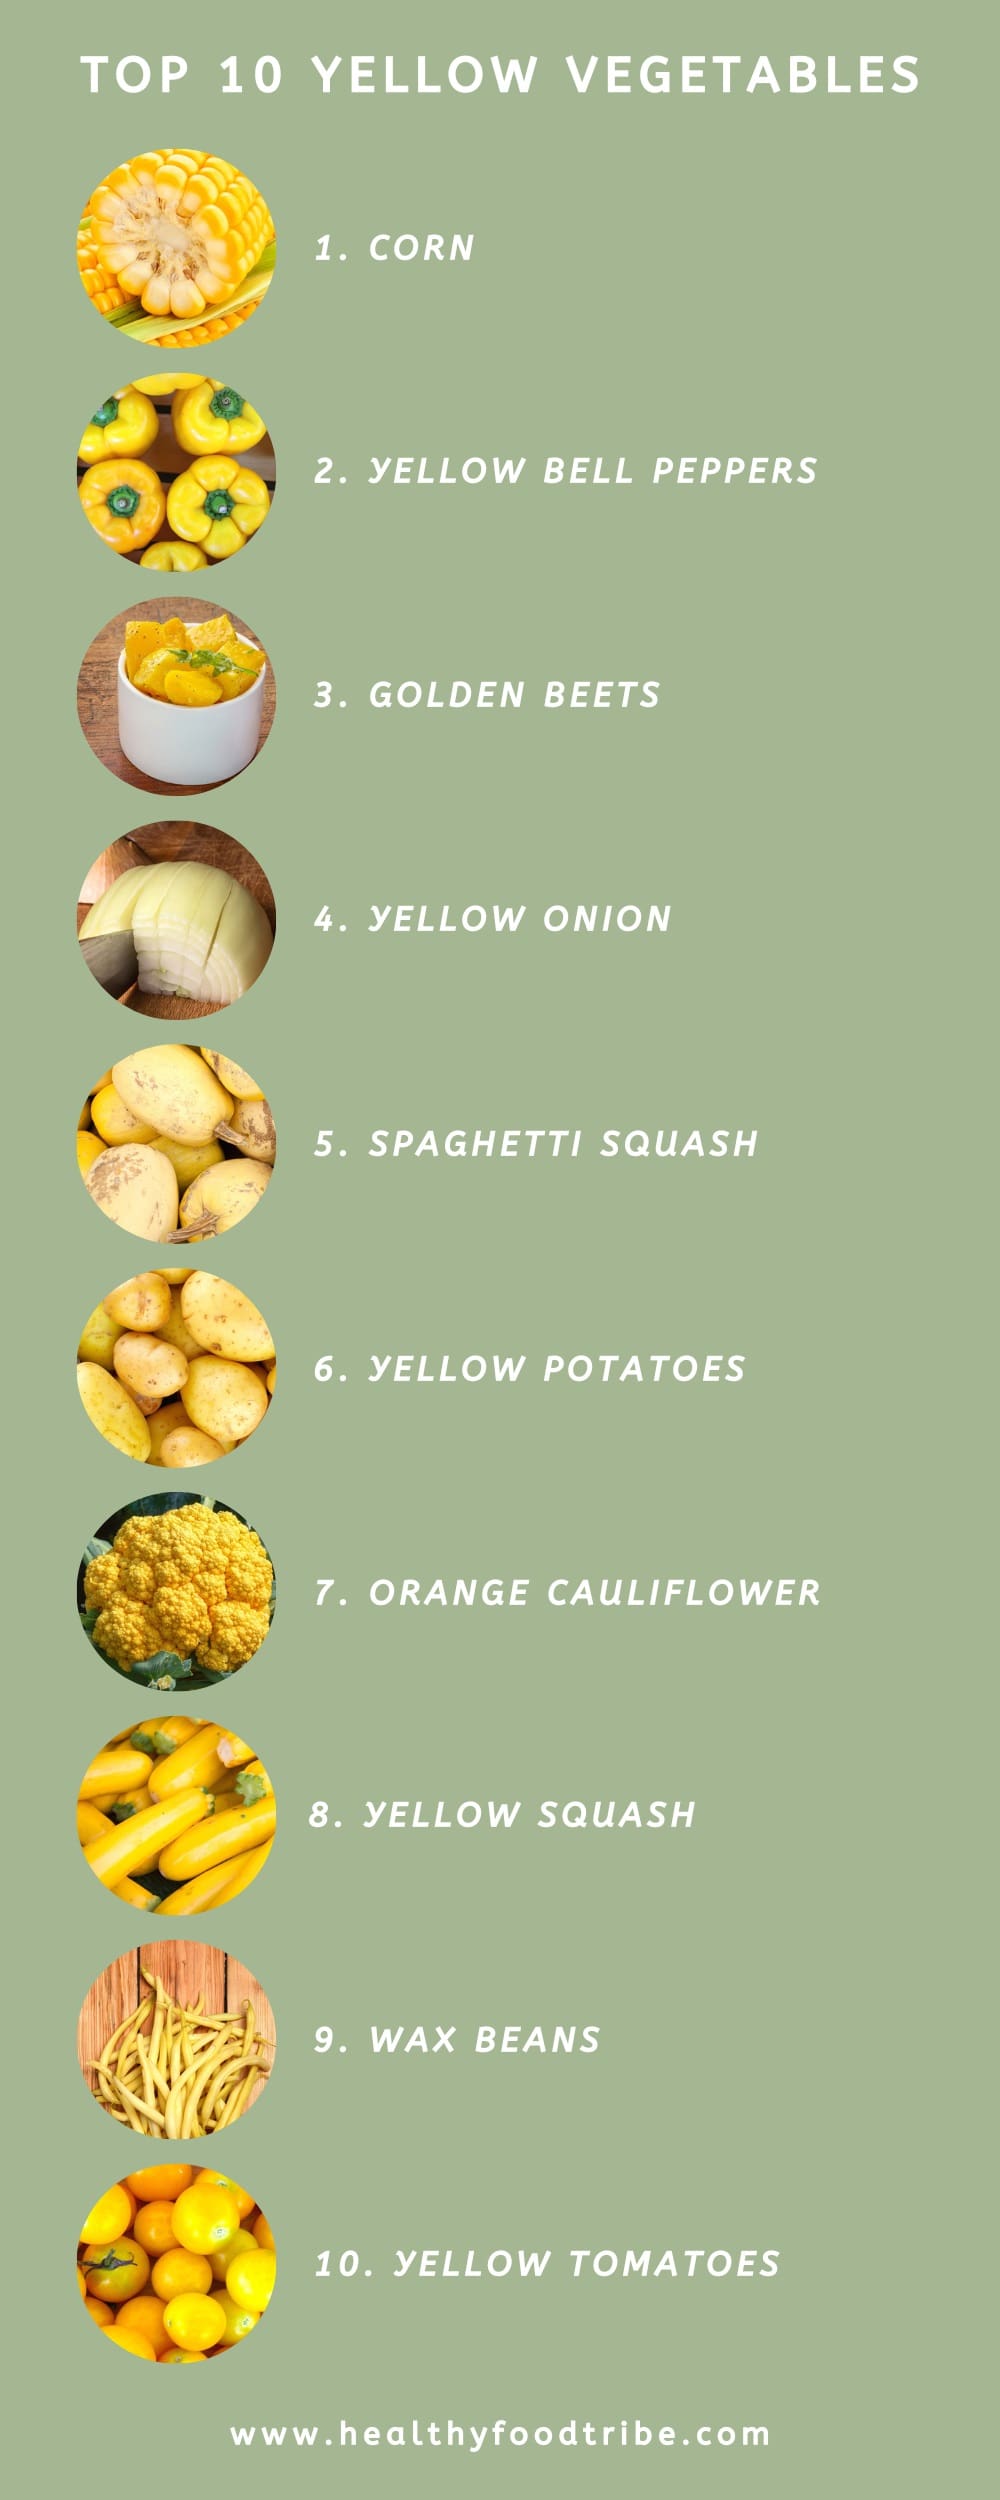 List of yellow vegetables